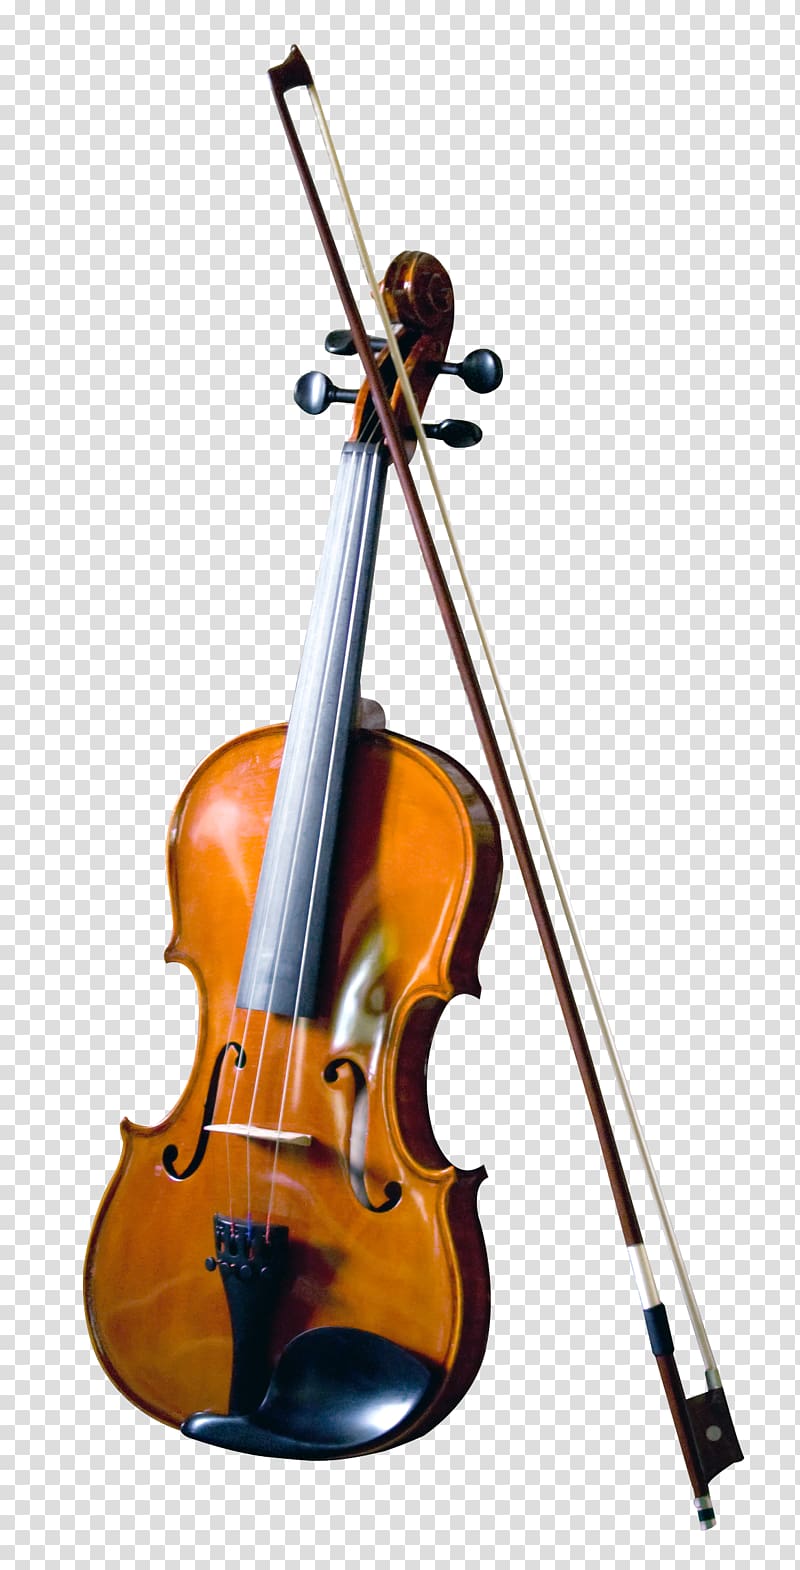 brown and black violin with bow, Bass violin Double bass Musical instrument, Violin transparent background PNG clipart